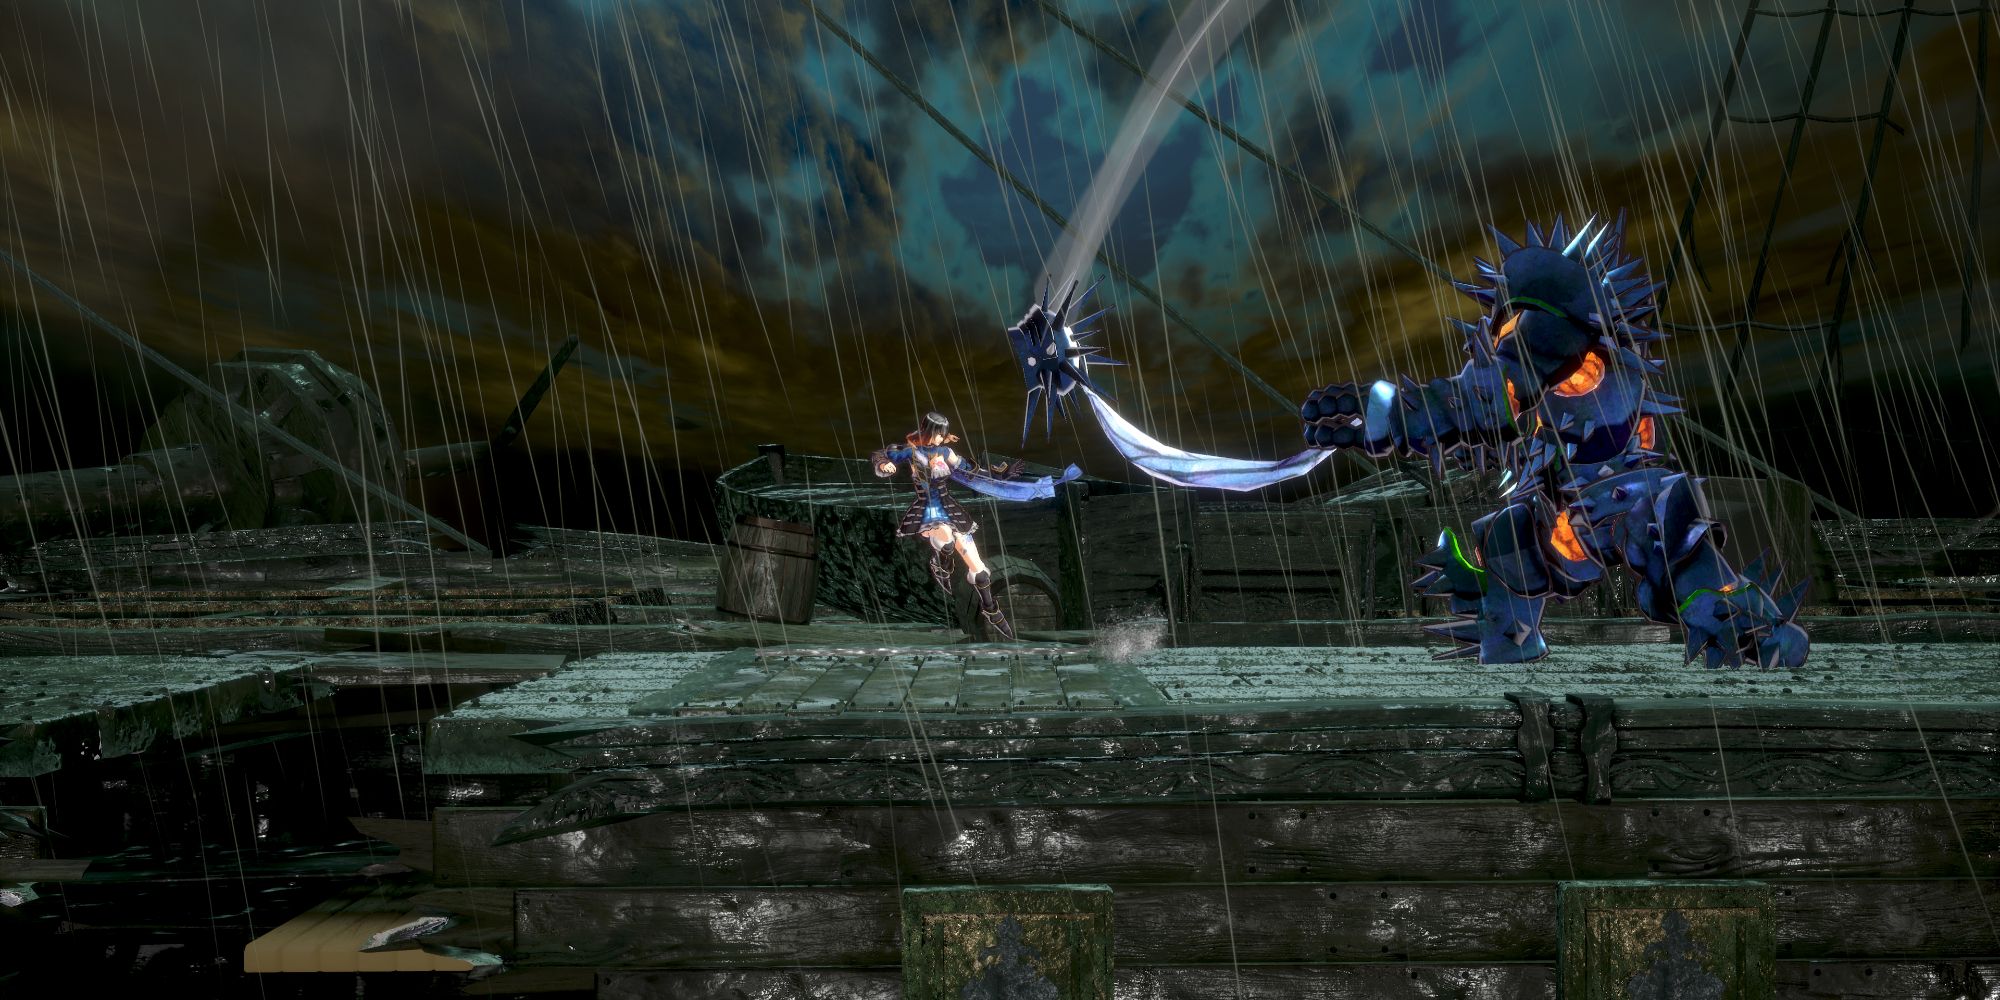 A player fighting a giant knight in the rain